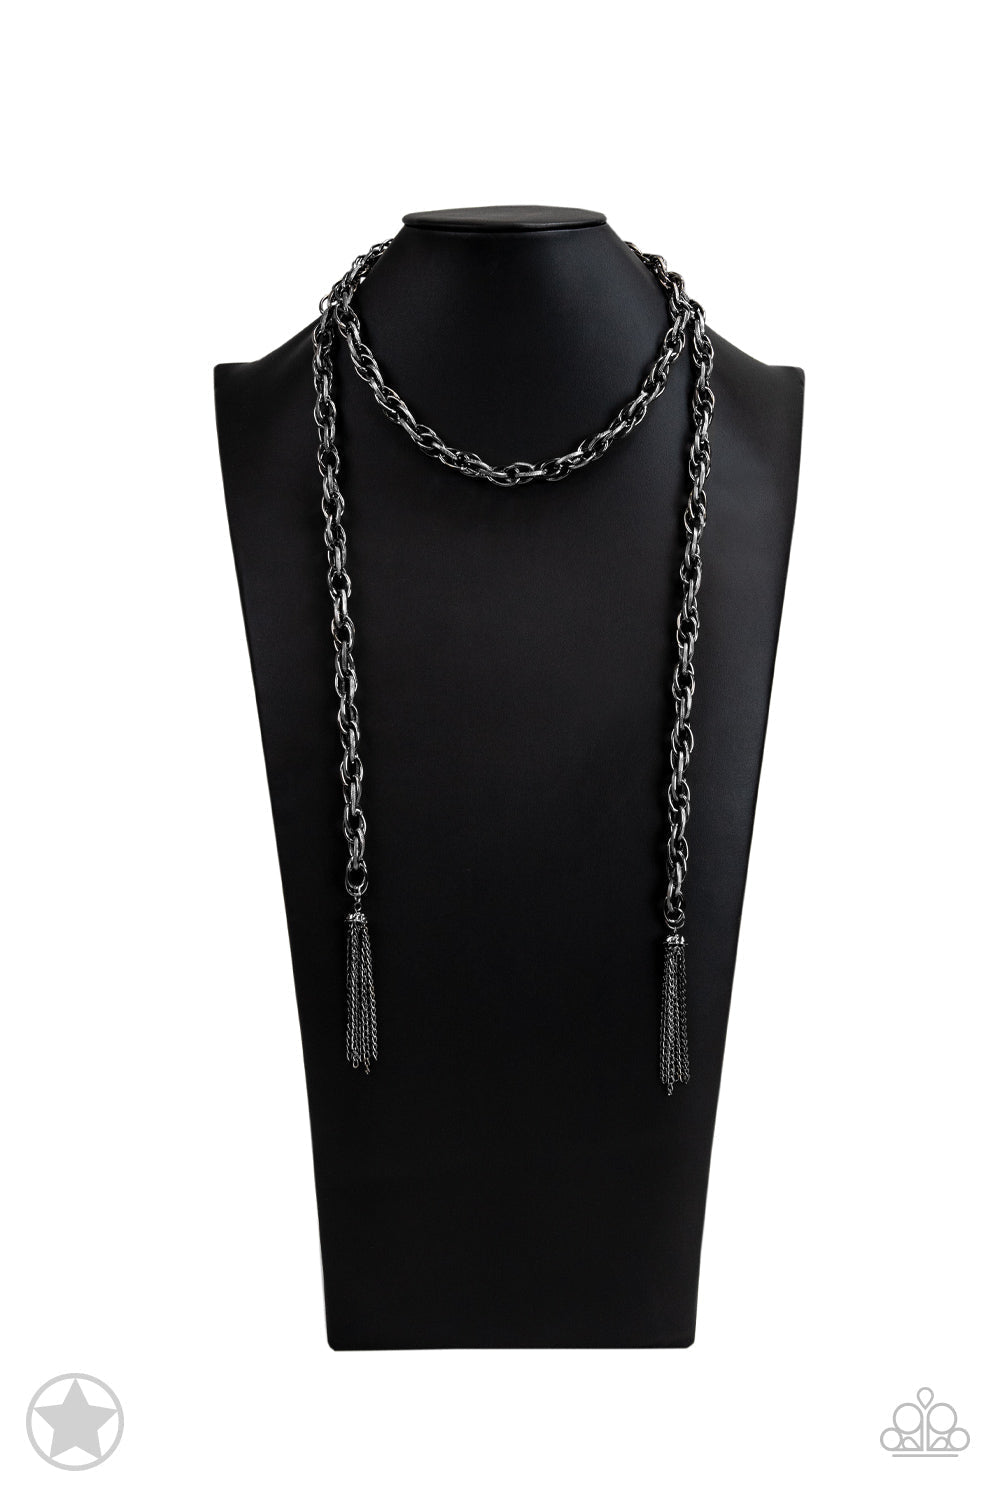 SCARFed for Attention - Gunmetal Scarf Necklace - Paparazzi Accessories - A single strand of spiraling, interlocking links with light-catching texture is anchored by two tassels of chain that add dramatic length to the piece. Undeniably the most versatile piece in Paparazzi's history, the scarf necklace features FIVE different ways to accessorize. Bejeweled Accessories By Kristie - Trendy fashion jewelry for everyone -